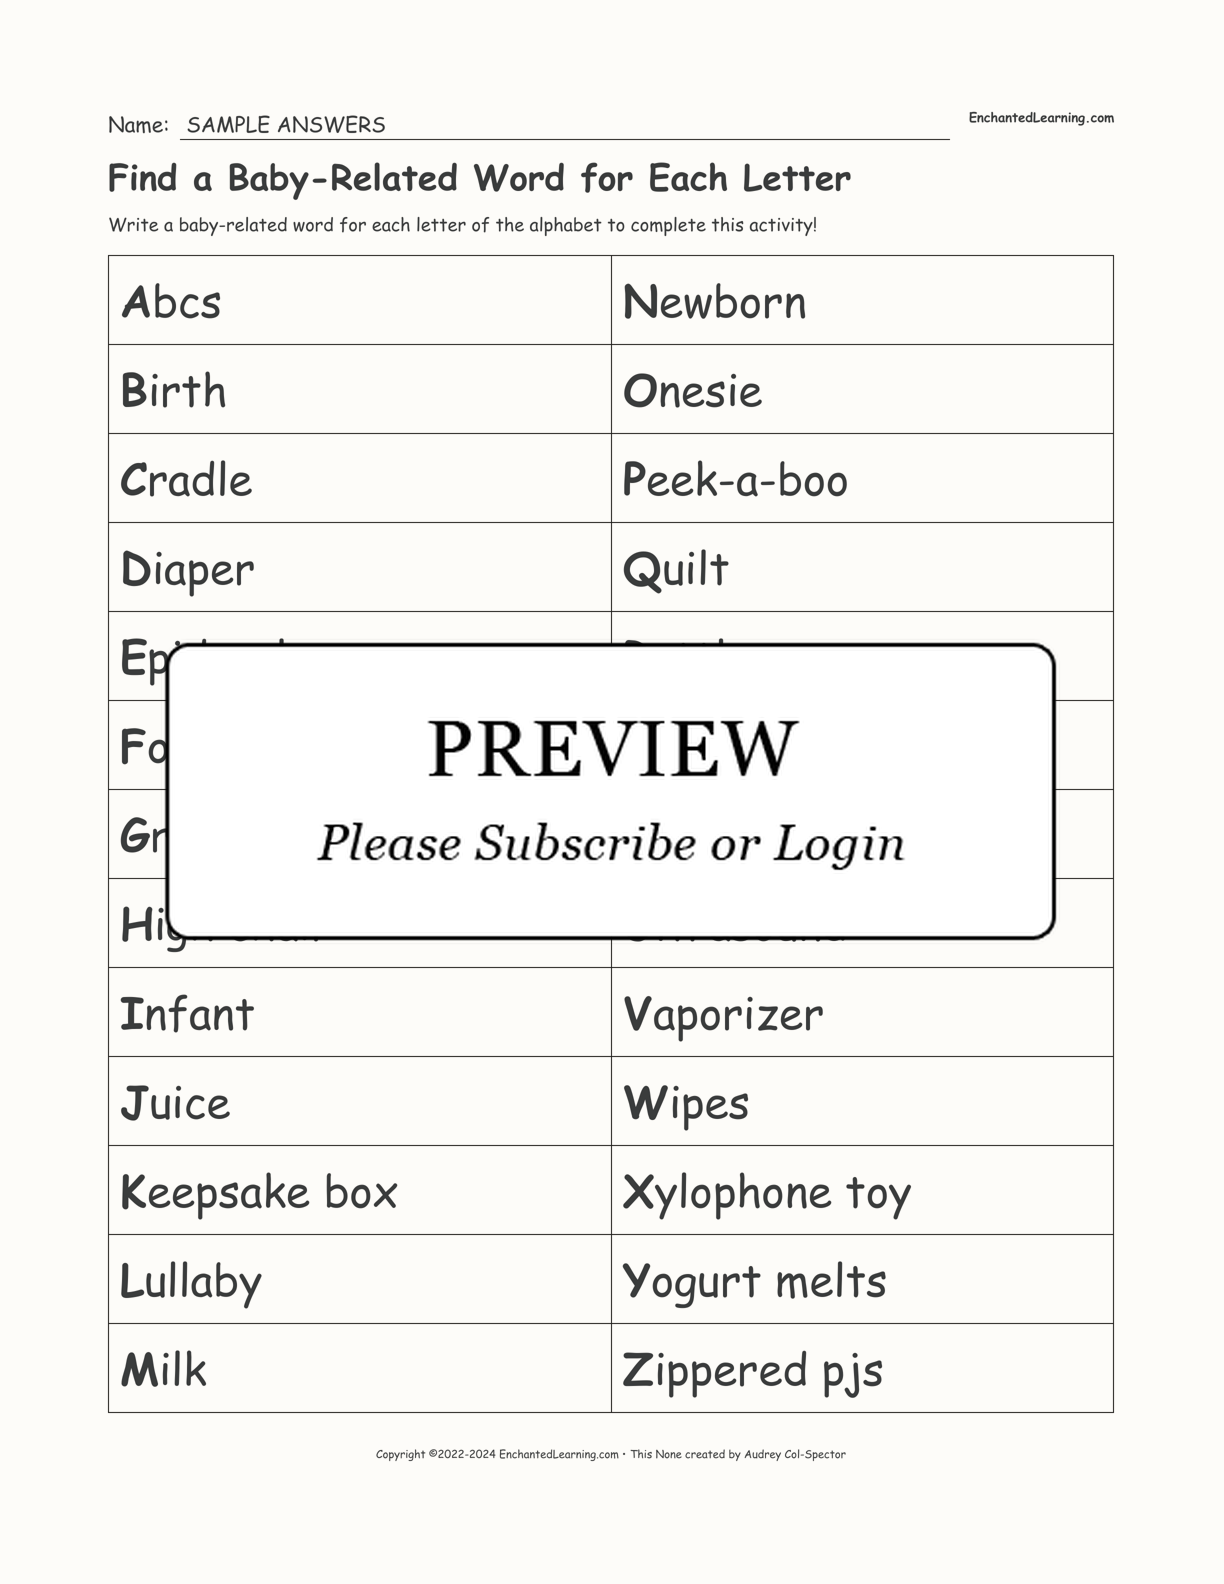 Find a Baby-Related Word for Each Letter interactive worksheet page 2